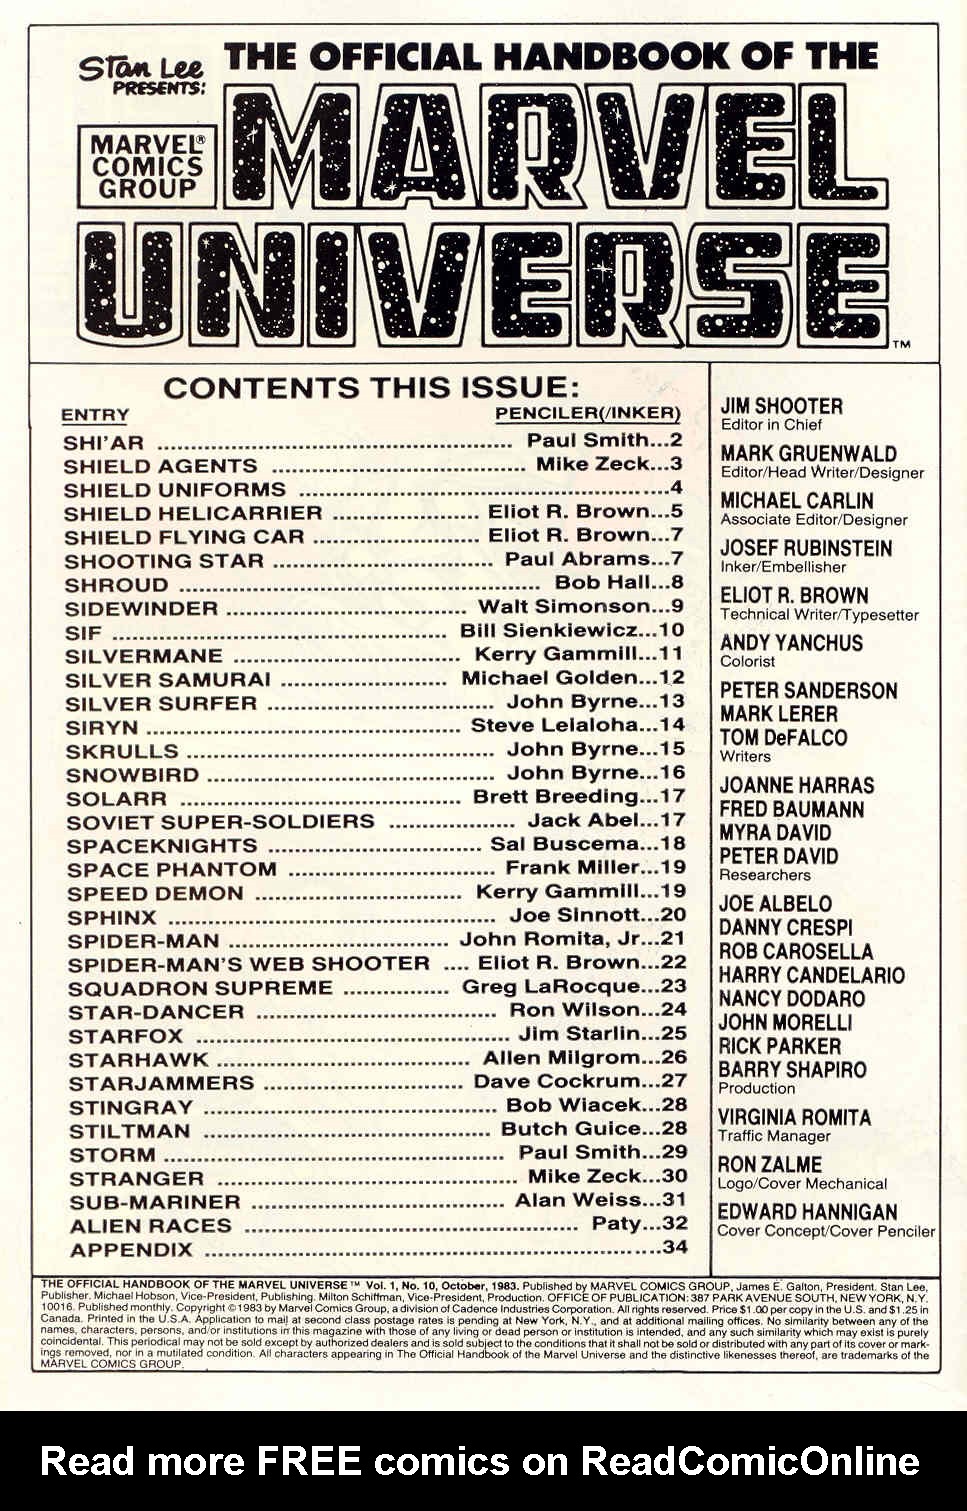 Read online The Official Handbook of the Marvel Universe comic -  Issue #10 - 2